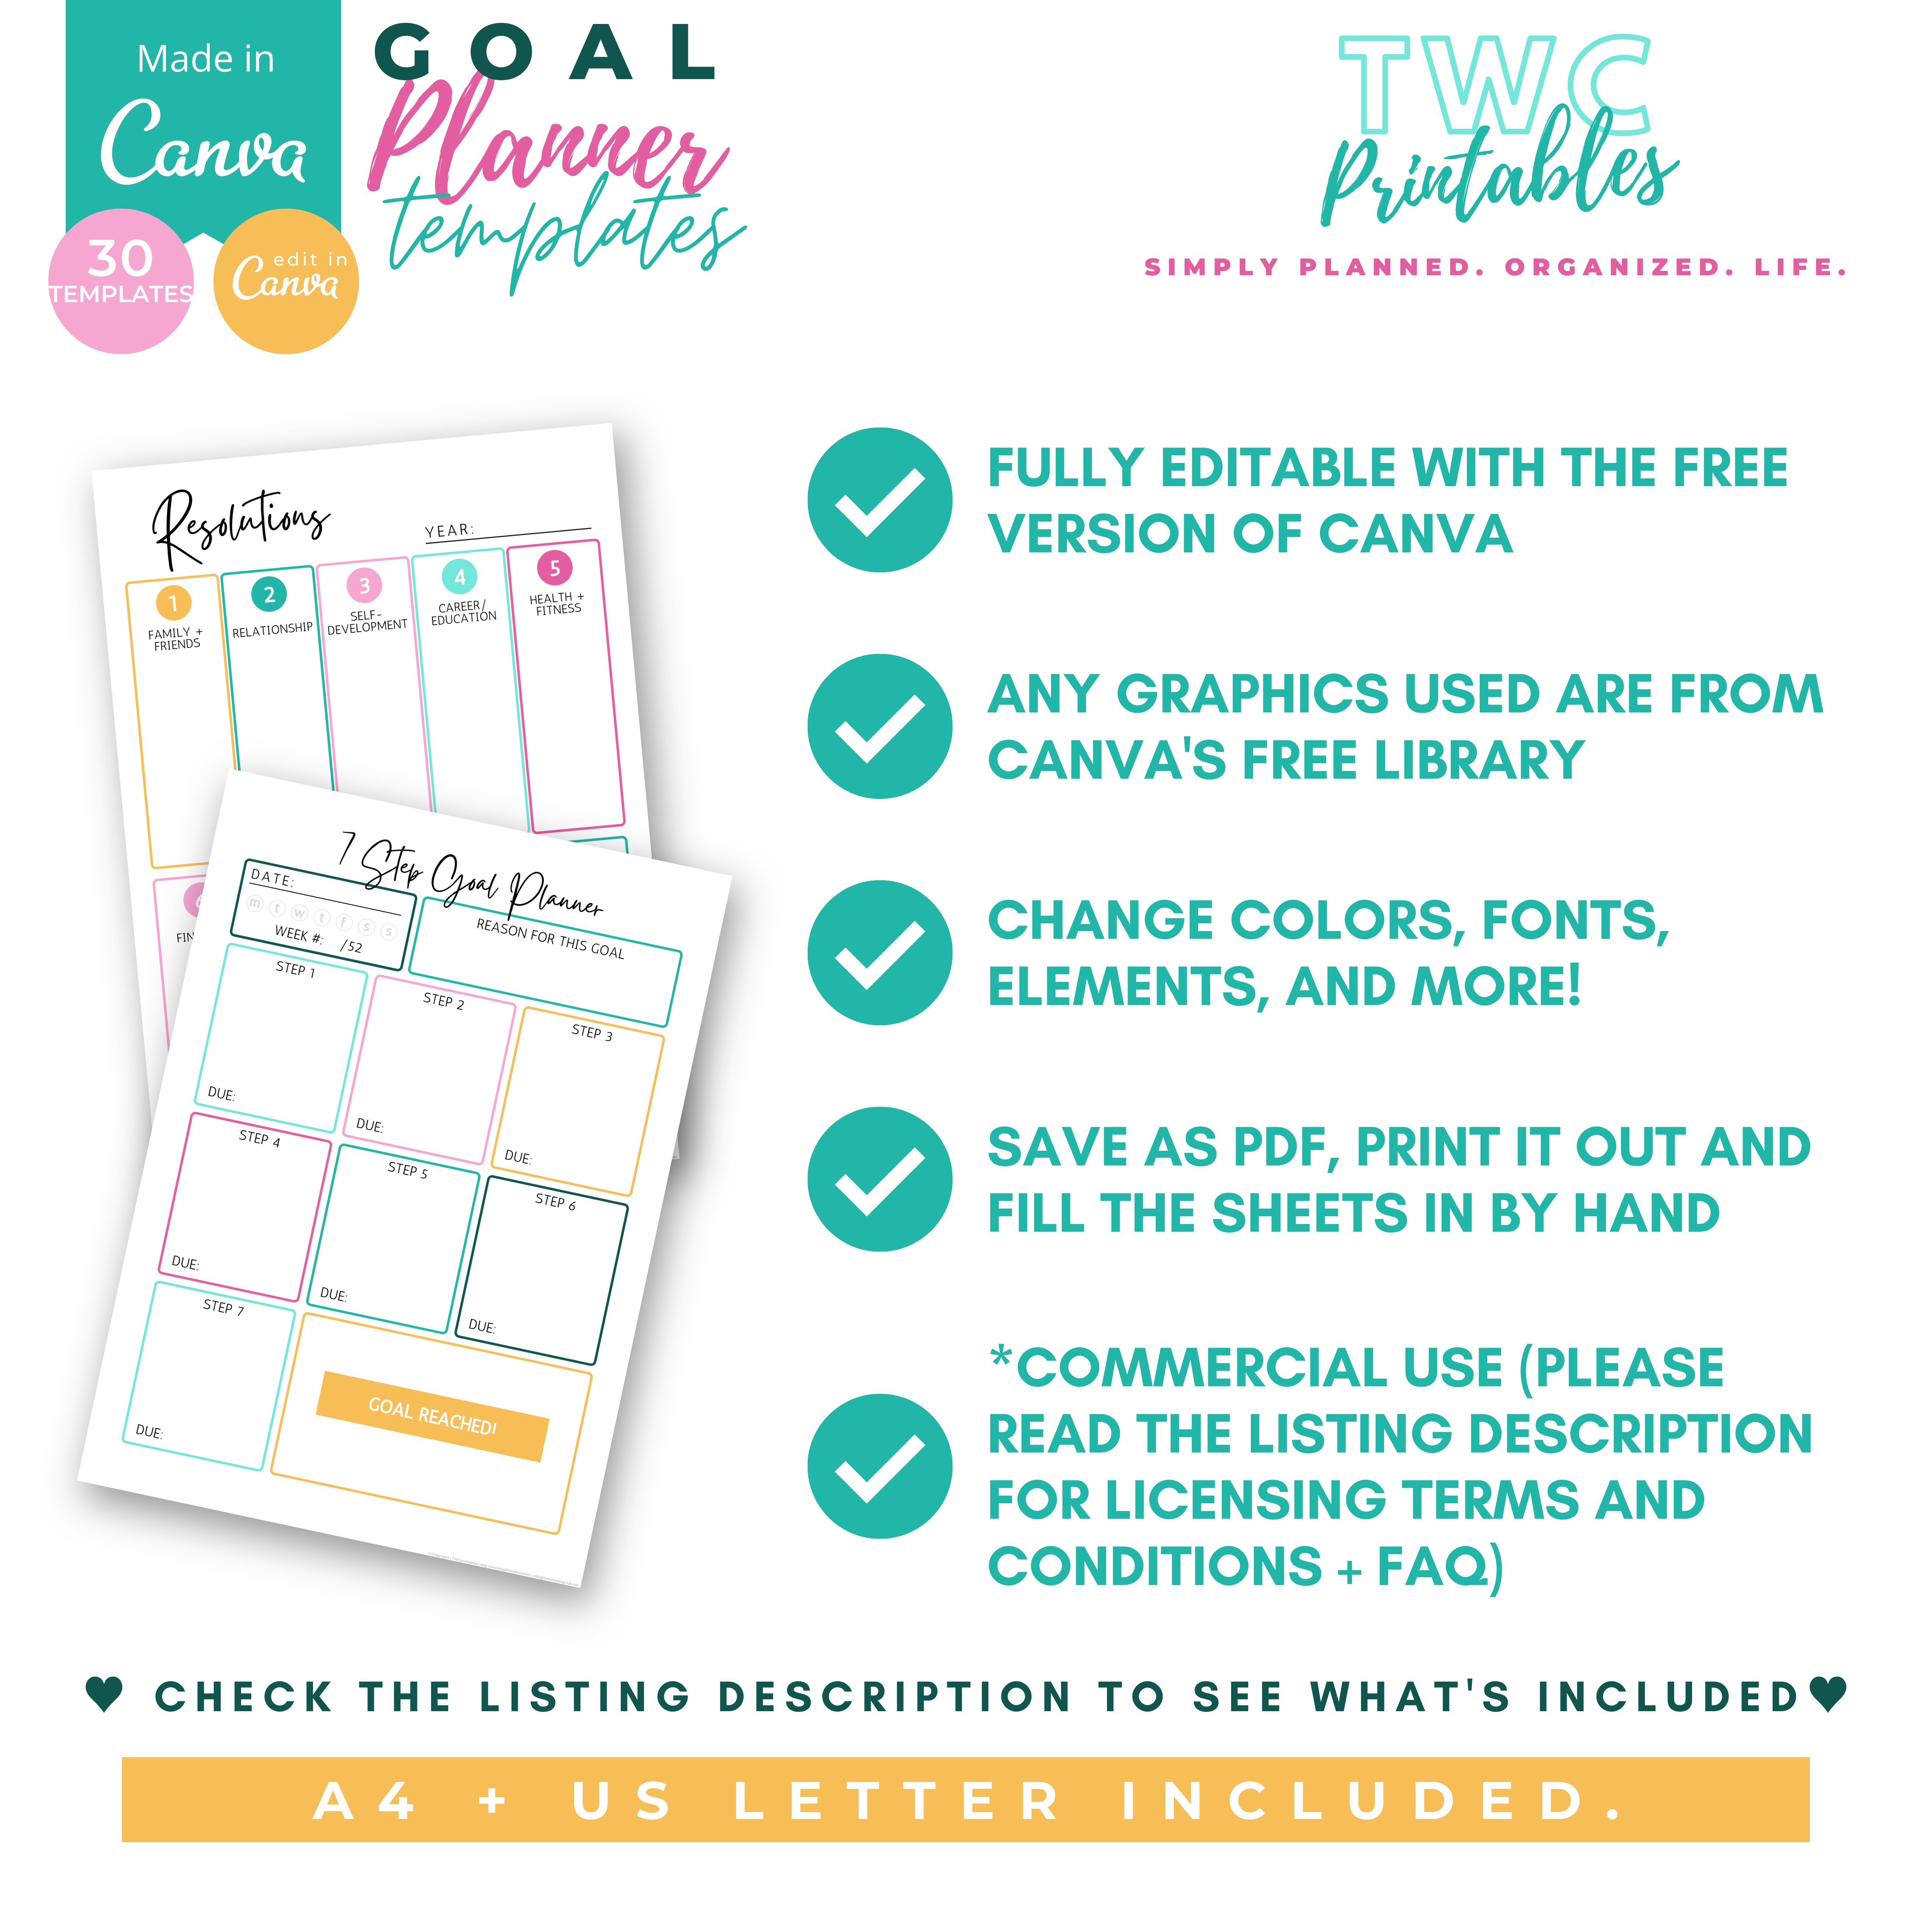 Set your goals and achieve them with these editable goal planner templates for Canva! Creating planner sheets from scratch takes so much time, and possibly money. These editable planner sheets will make it easier to create the sheets you really need to plan out your goals, resolutions, and priorities. Stay productive and get things done with the productivity planner sheets that are also included.